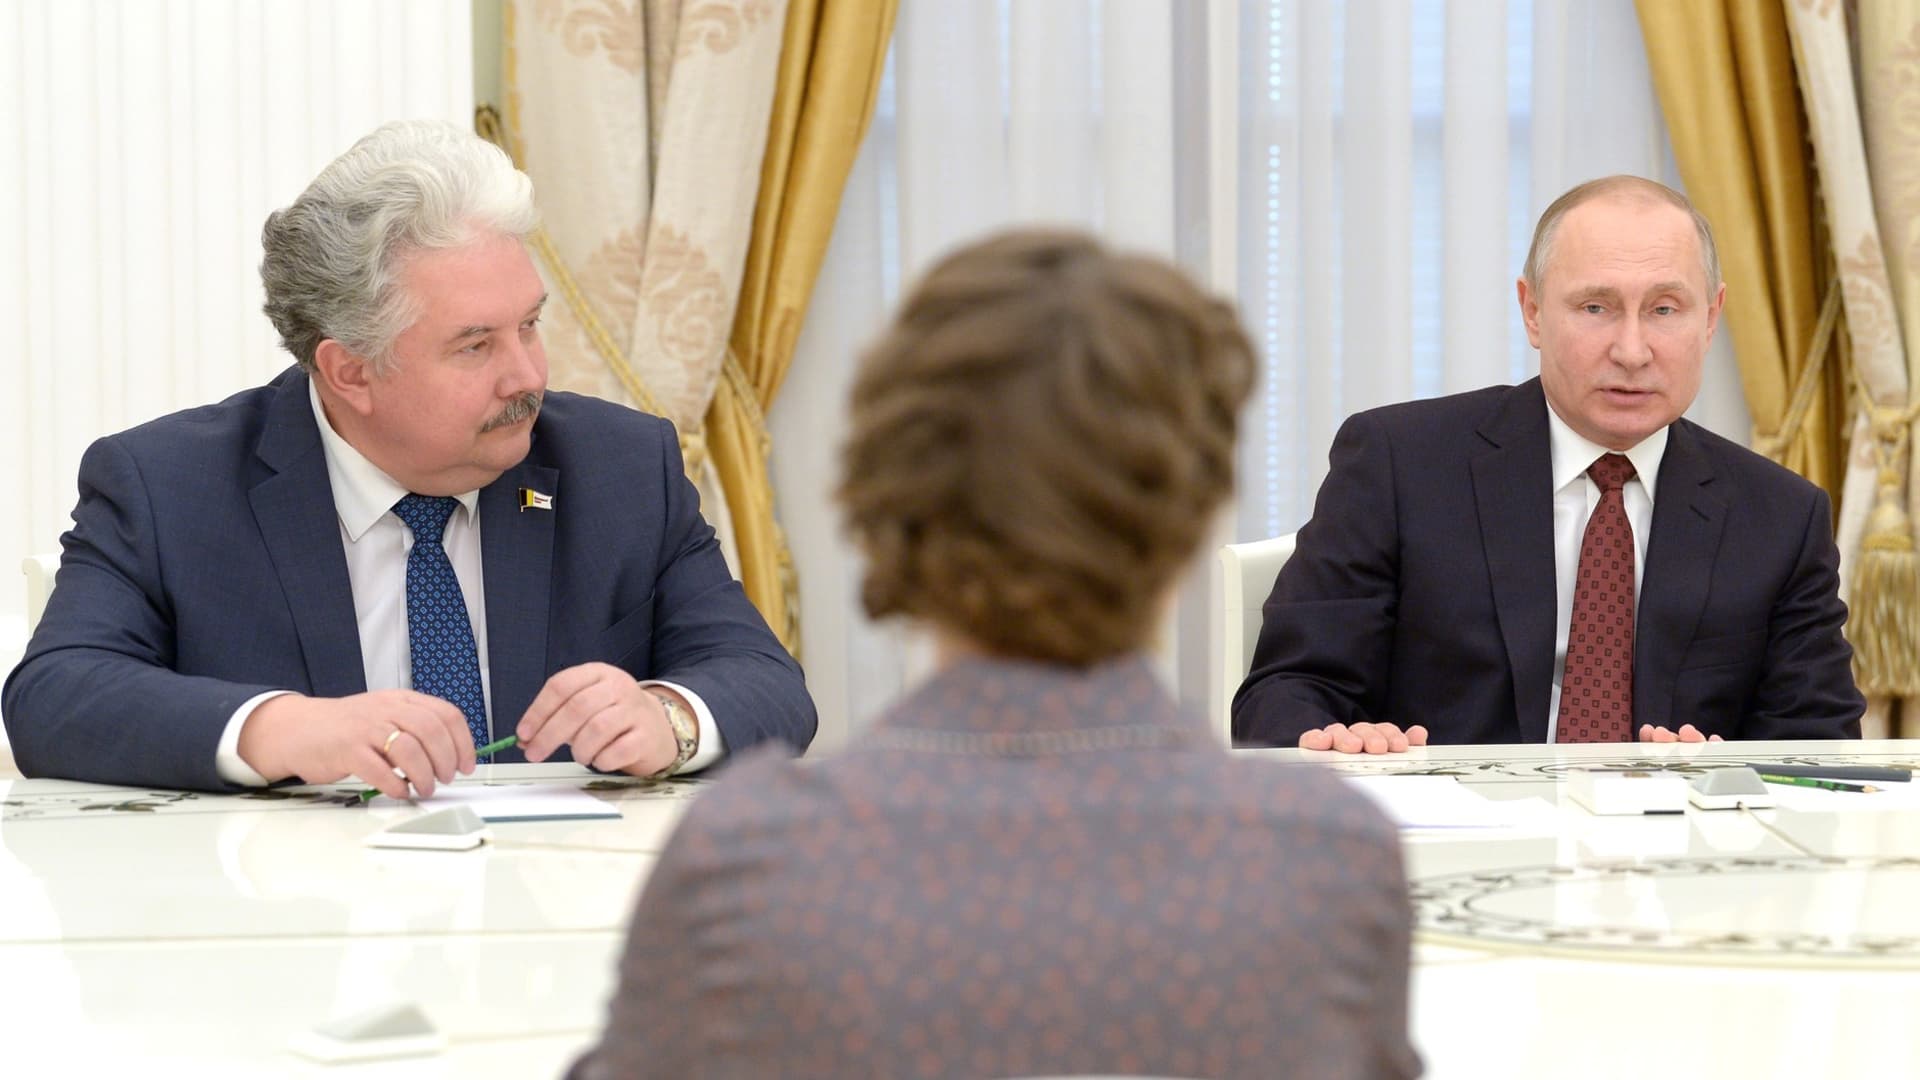 Sergei Baburin (rear L), now-former presidential candidate nominated by the Russian All People's Union Party and Russia's President Vladimir Putin (rear R) during a meeting at Moscow's Kremlin in Moscow in 2018. 